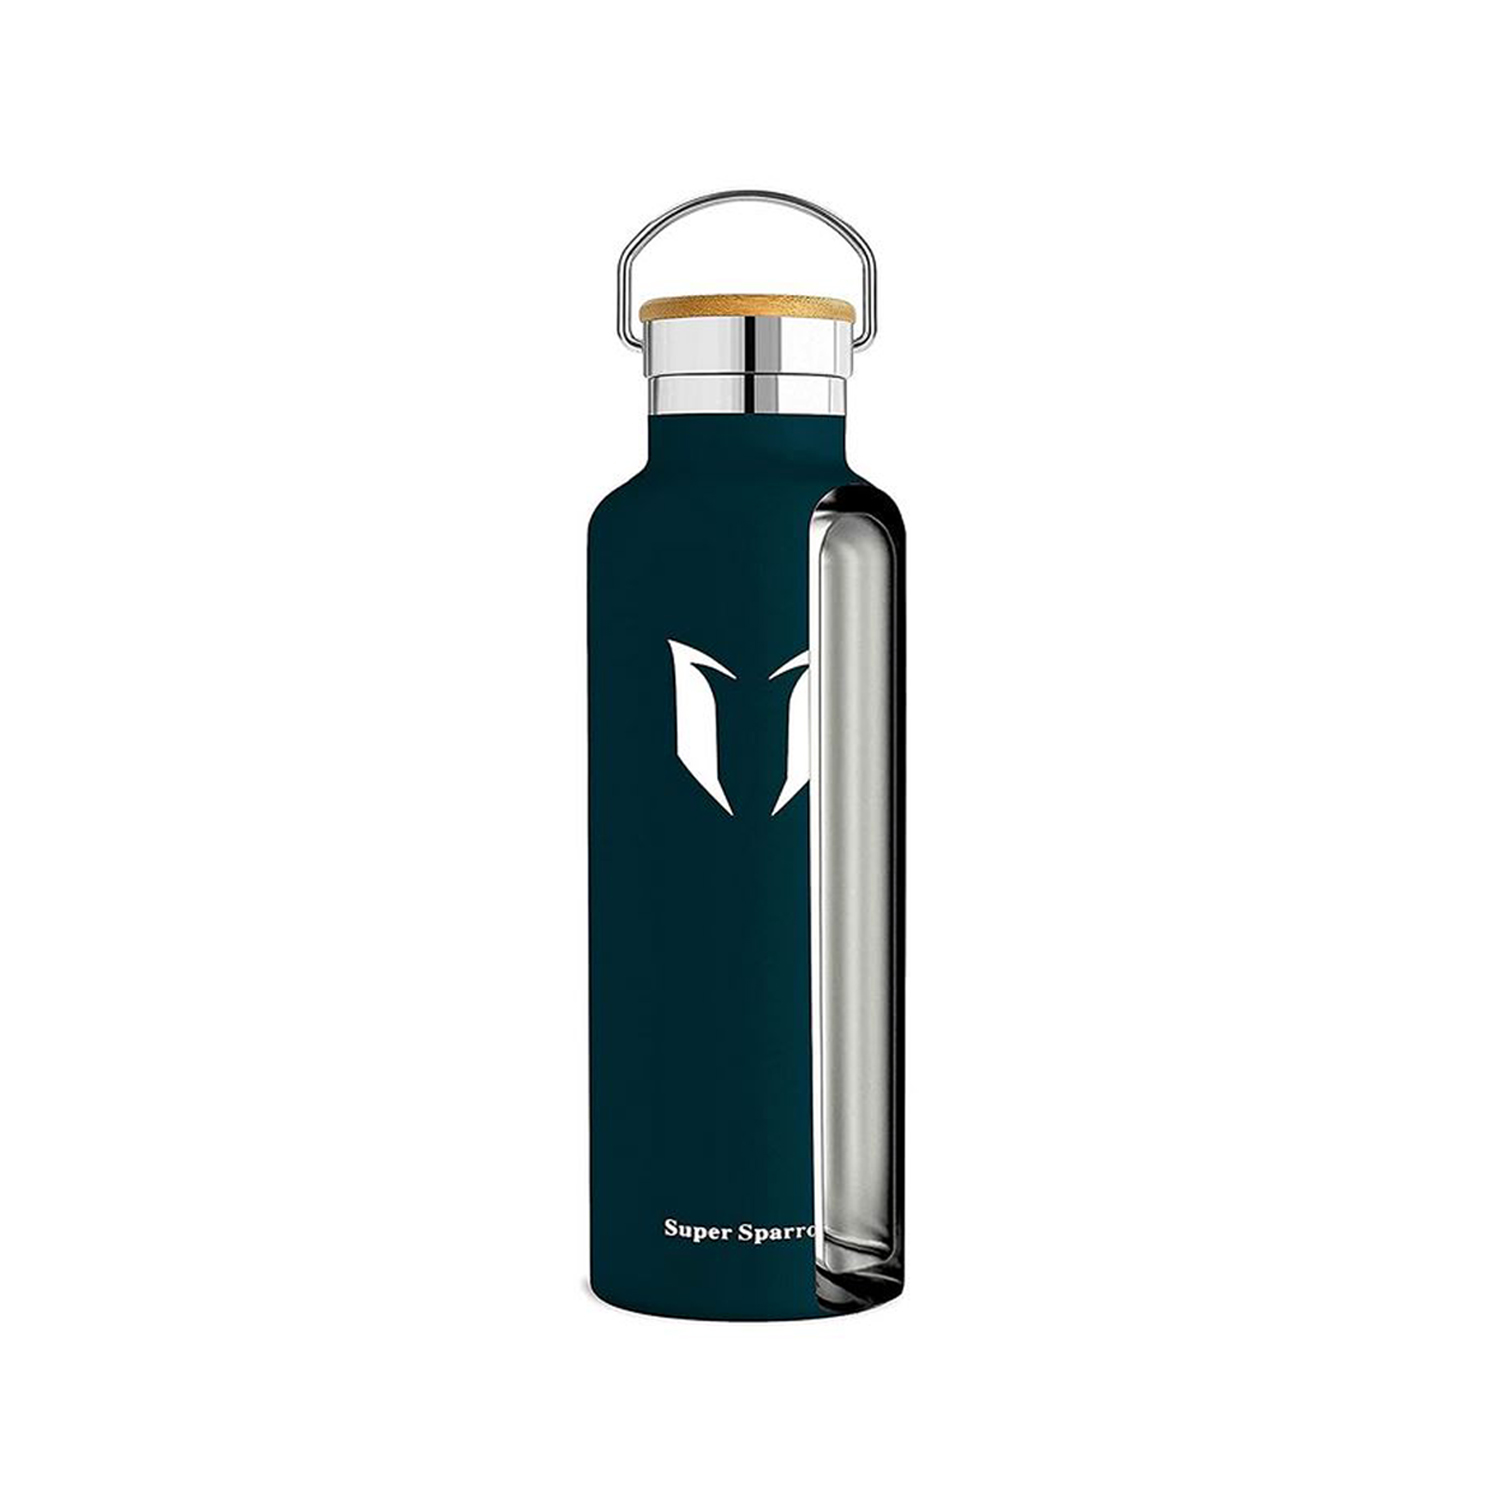 Super Sparrow Water Bottle, Insulated Stainless Steel, 750ml